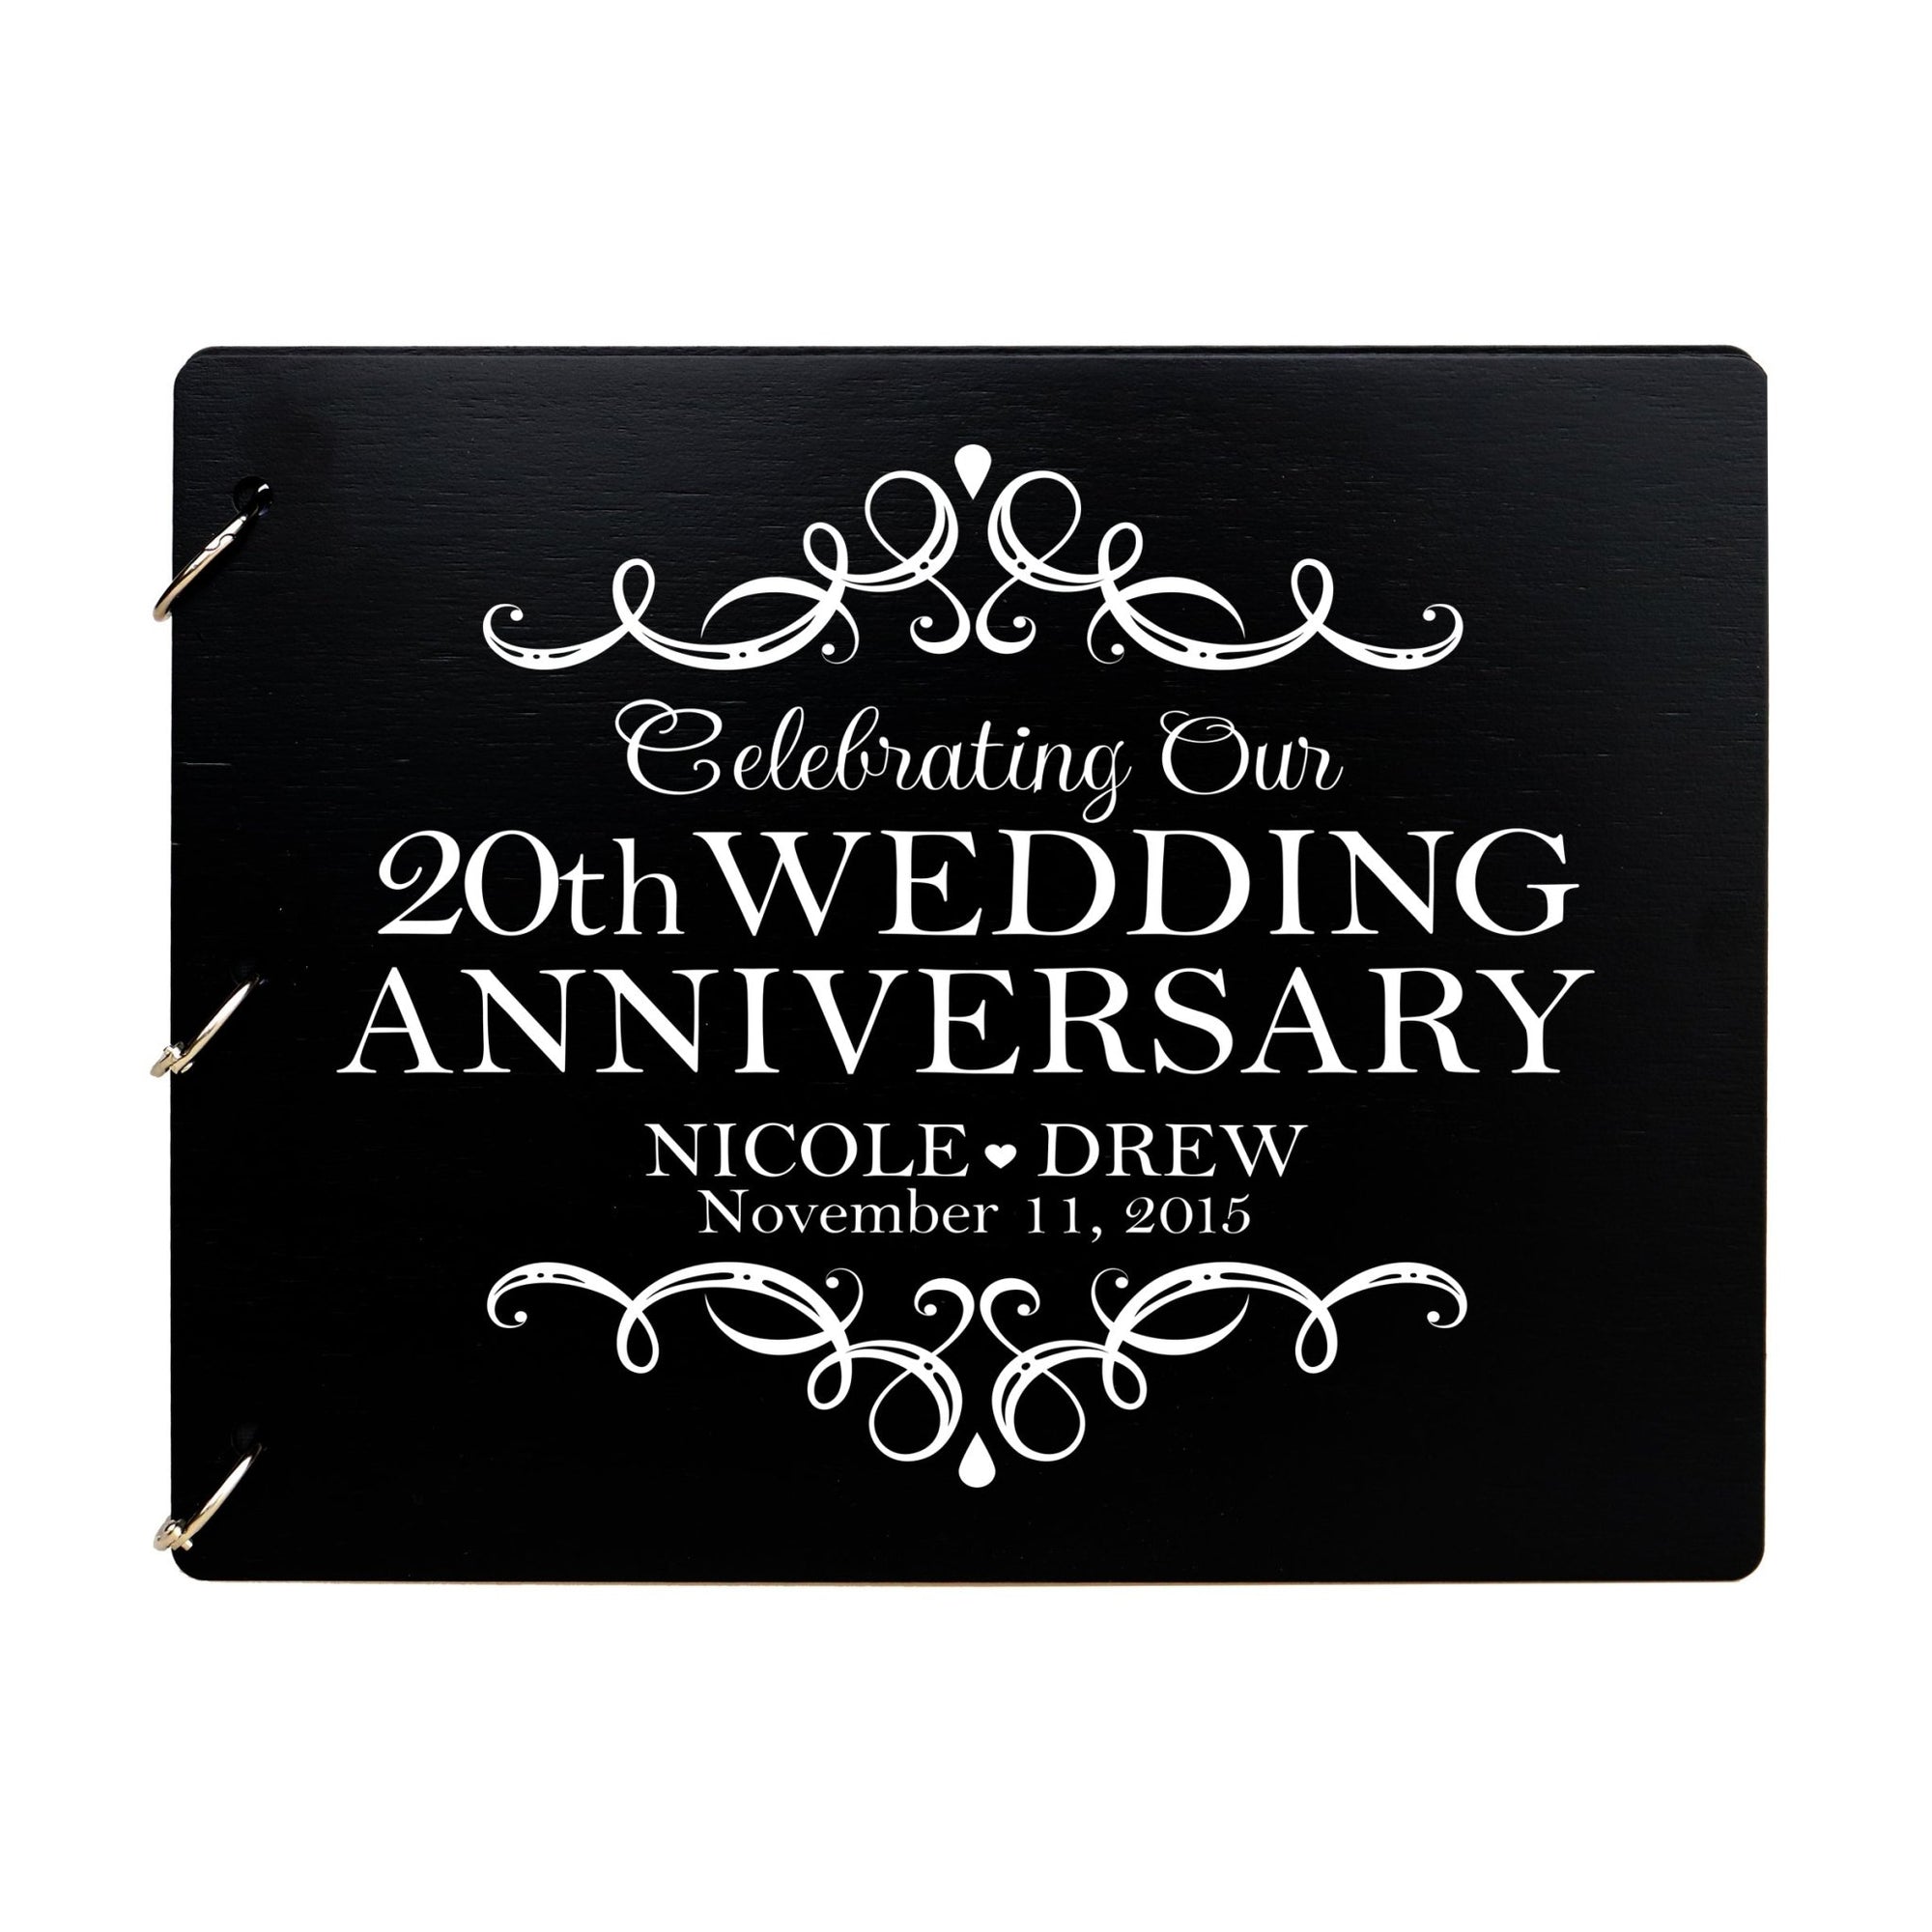 Personalized 20th Wedding Anniversary Guestbook - LifeSong Milestones